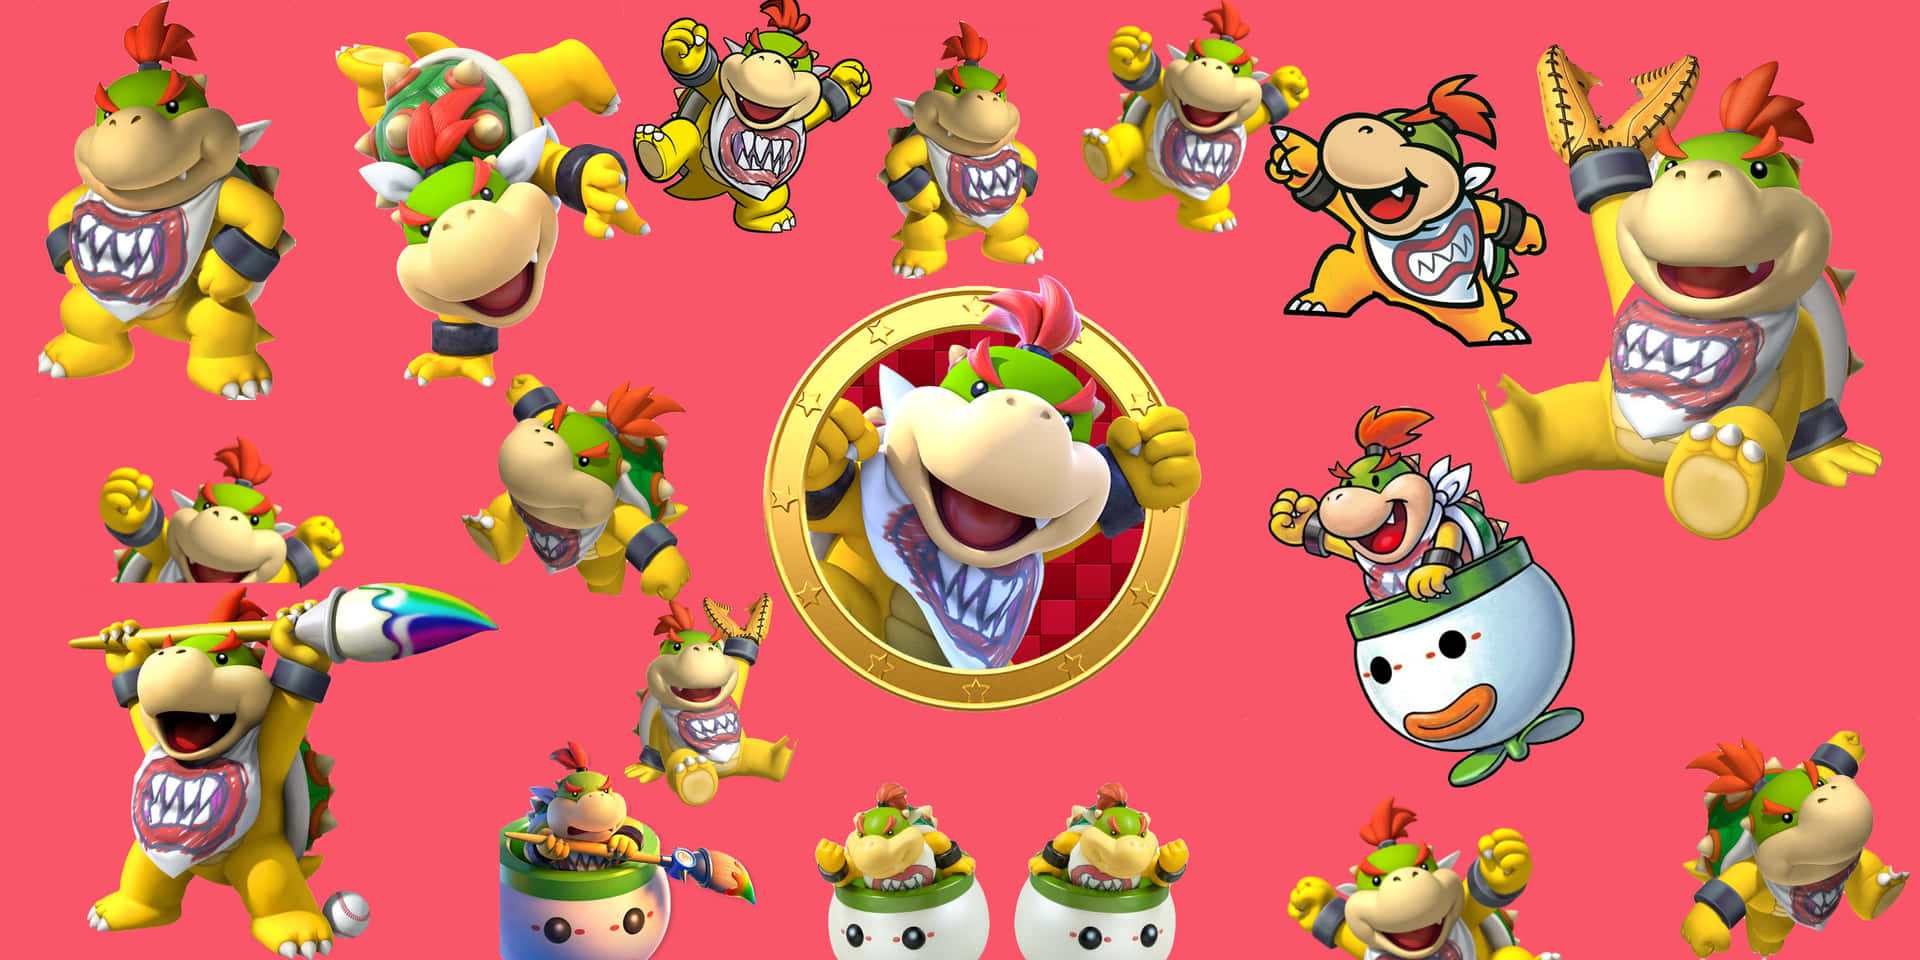 Bowser Jr. in Action - 2880 x 1440 Wallpapers Wallpaper